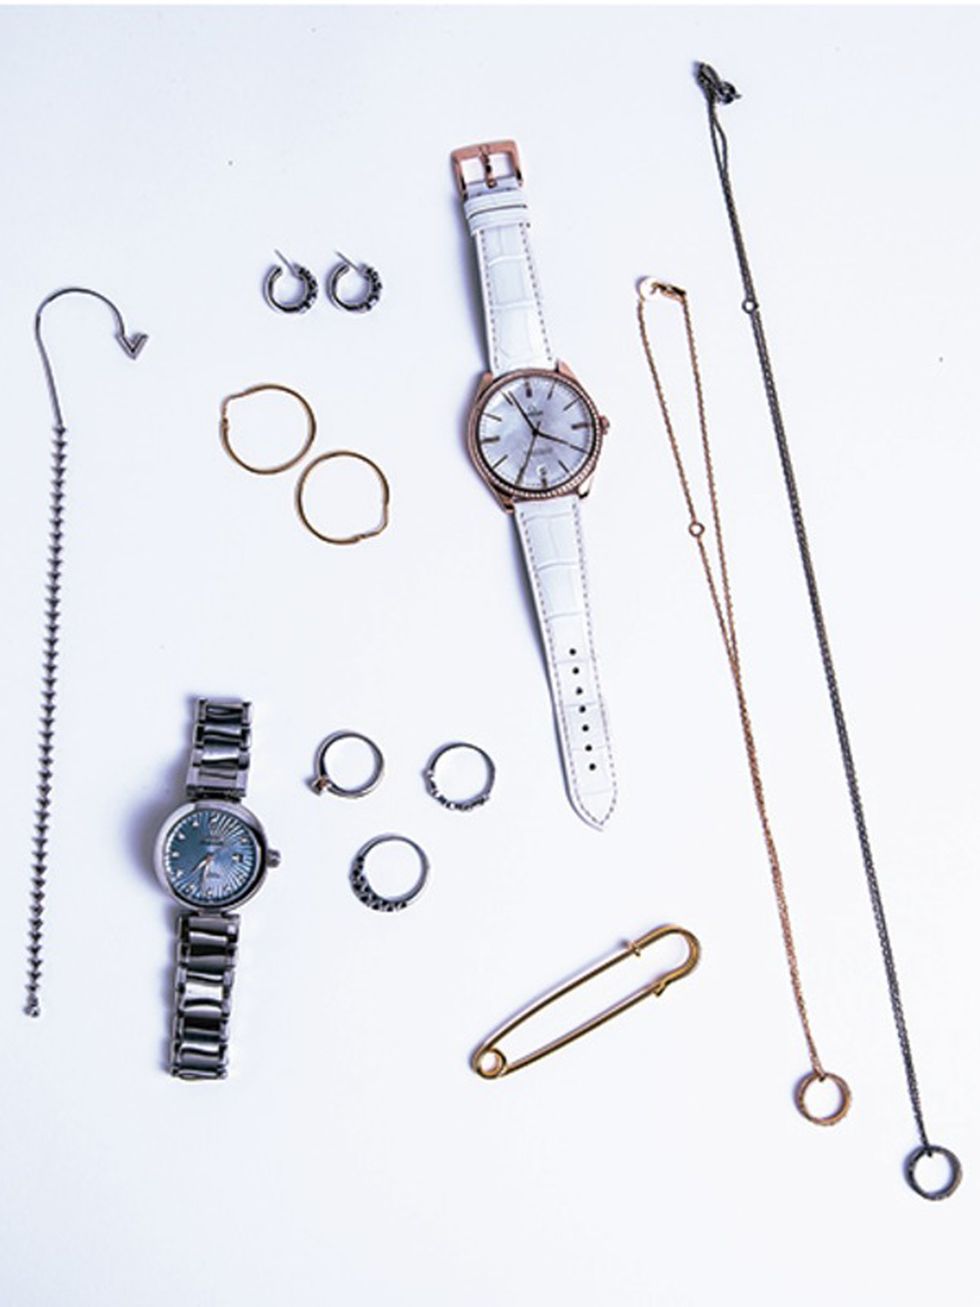 Watch, Font, Analog watch, Metal, Circle, Watch accessory, Nickel, Number, Silver, Still life photography, 